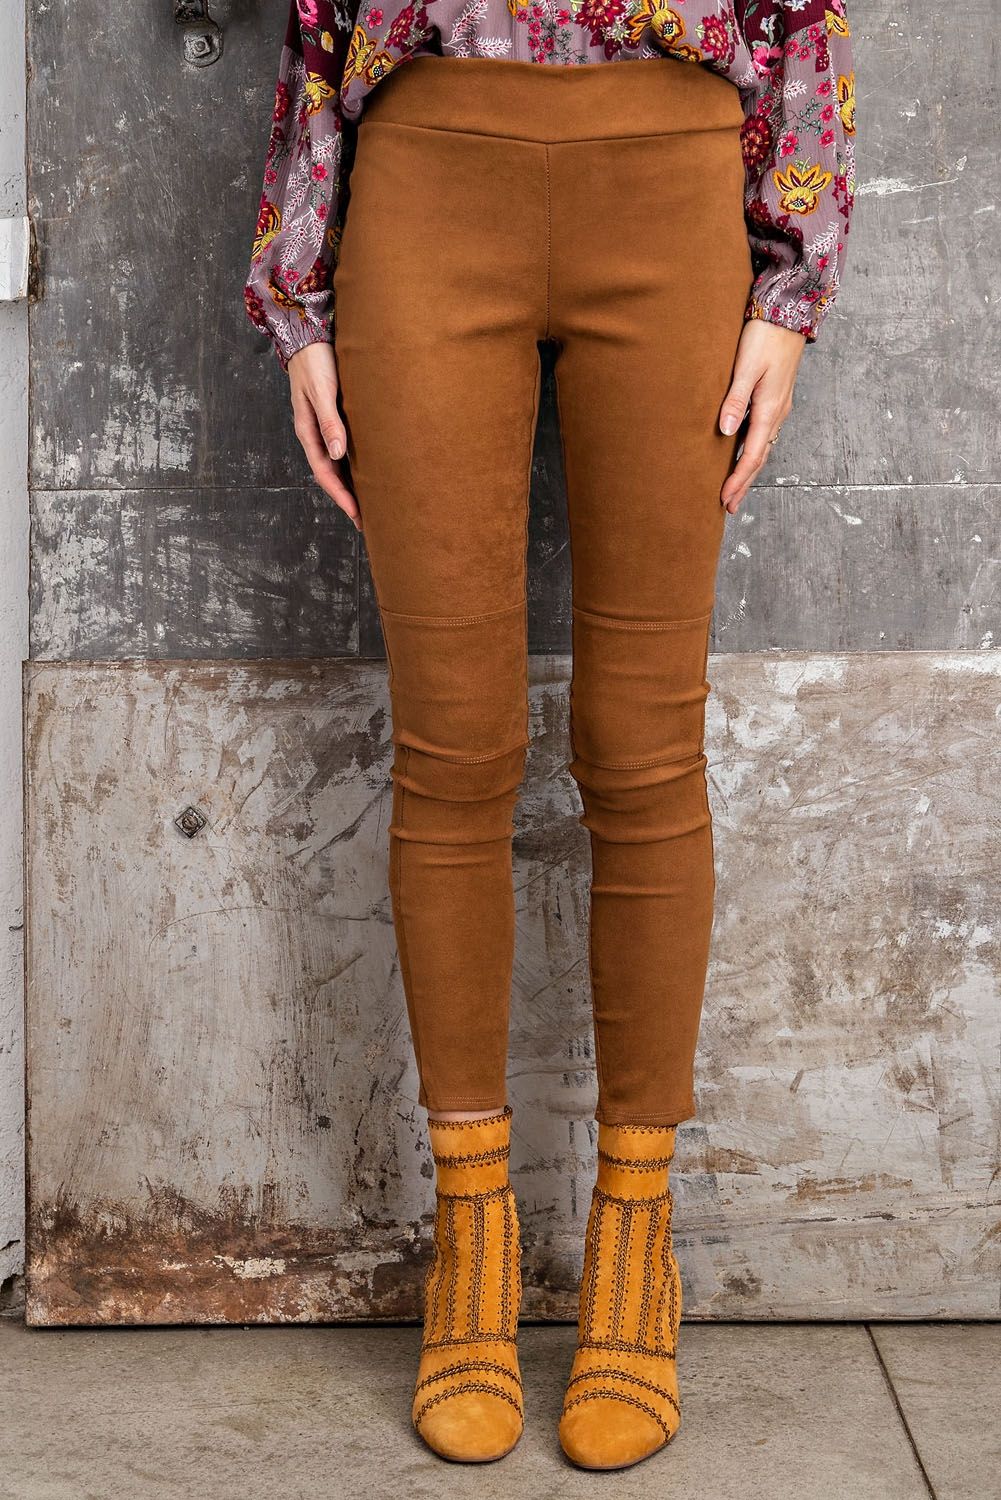 Soft Suede High Waist Moto Leggings by Easel Clothing